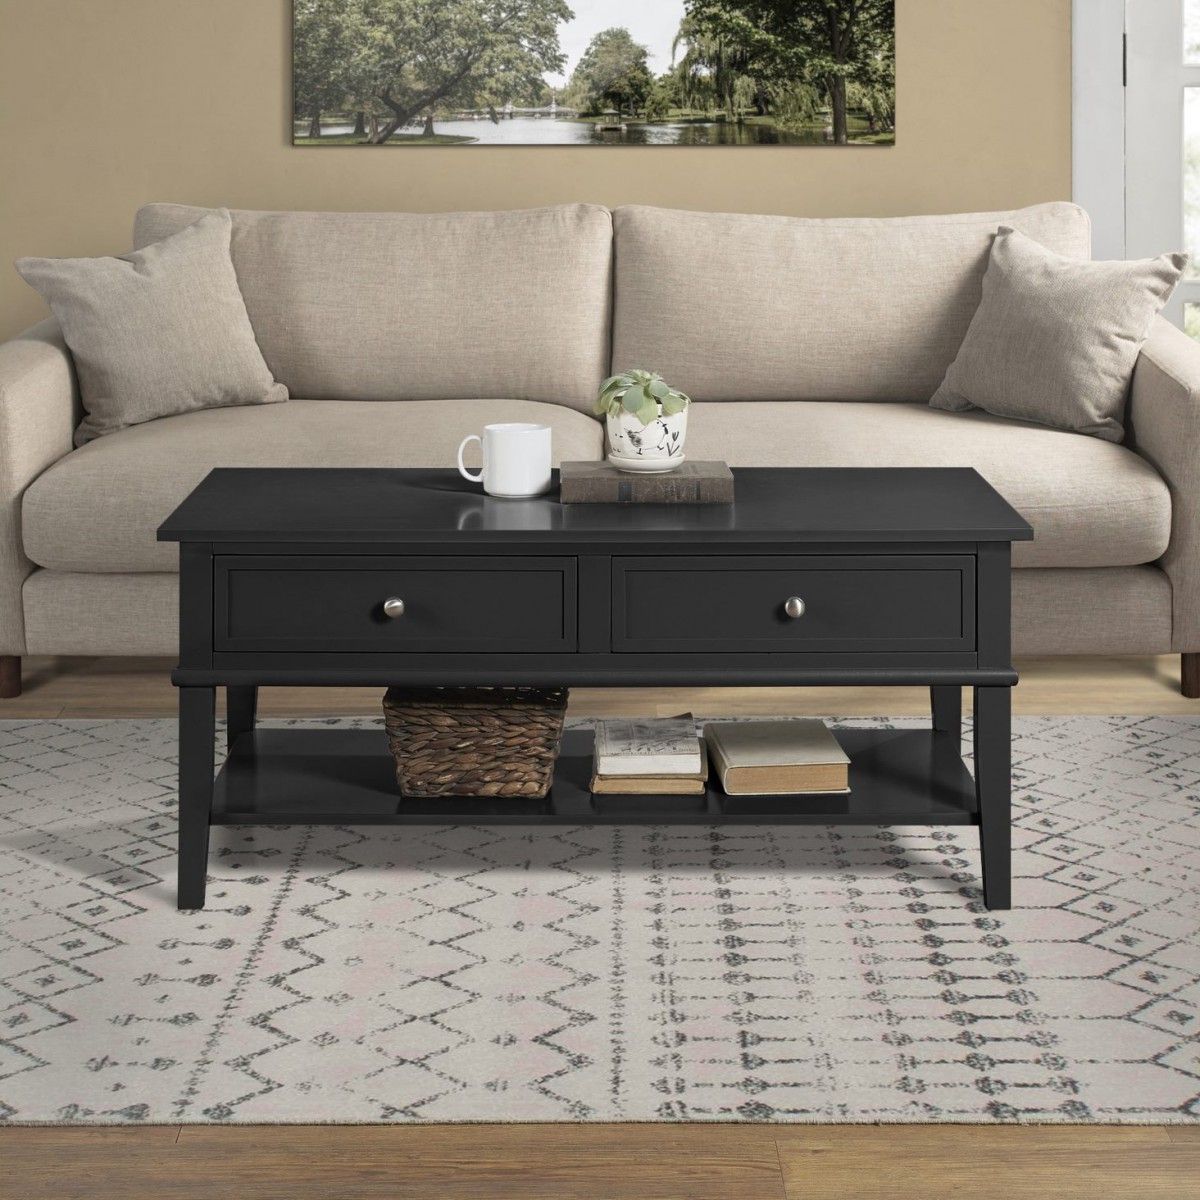 Dorel Franklin Coffee Table Black Grey Or White Painted Wood For Well Known Gray And Gold Coffee Tables (View 11 of 20)